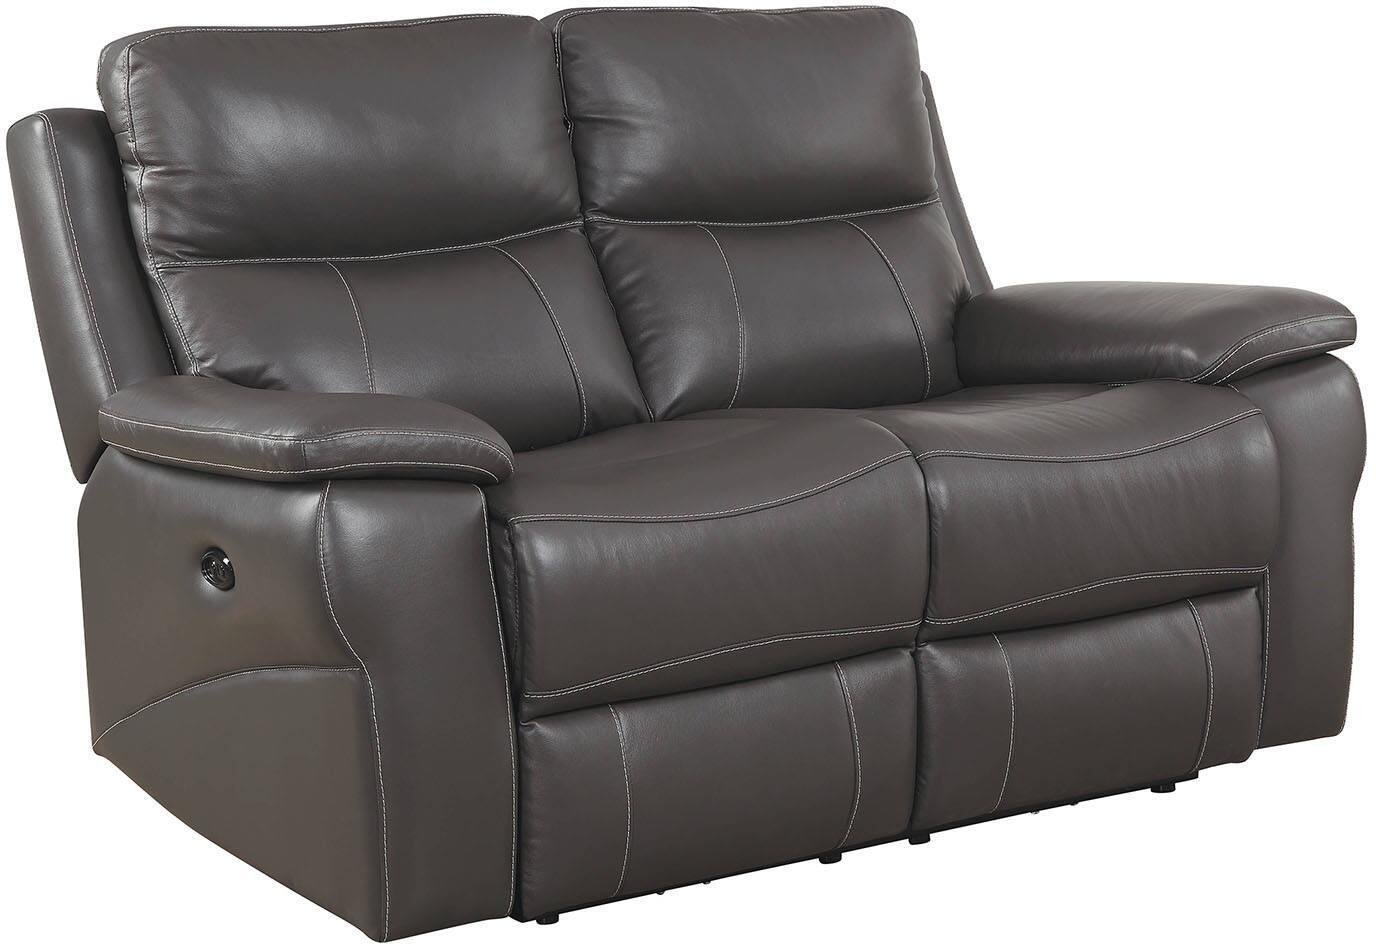 Transitional Power Reclining Loveseat CM6540-PM-LV Lila CM6540-PM-LV in Gray Top grain leather